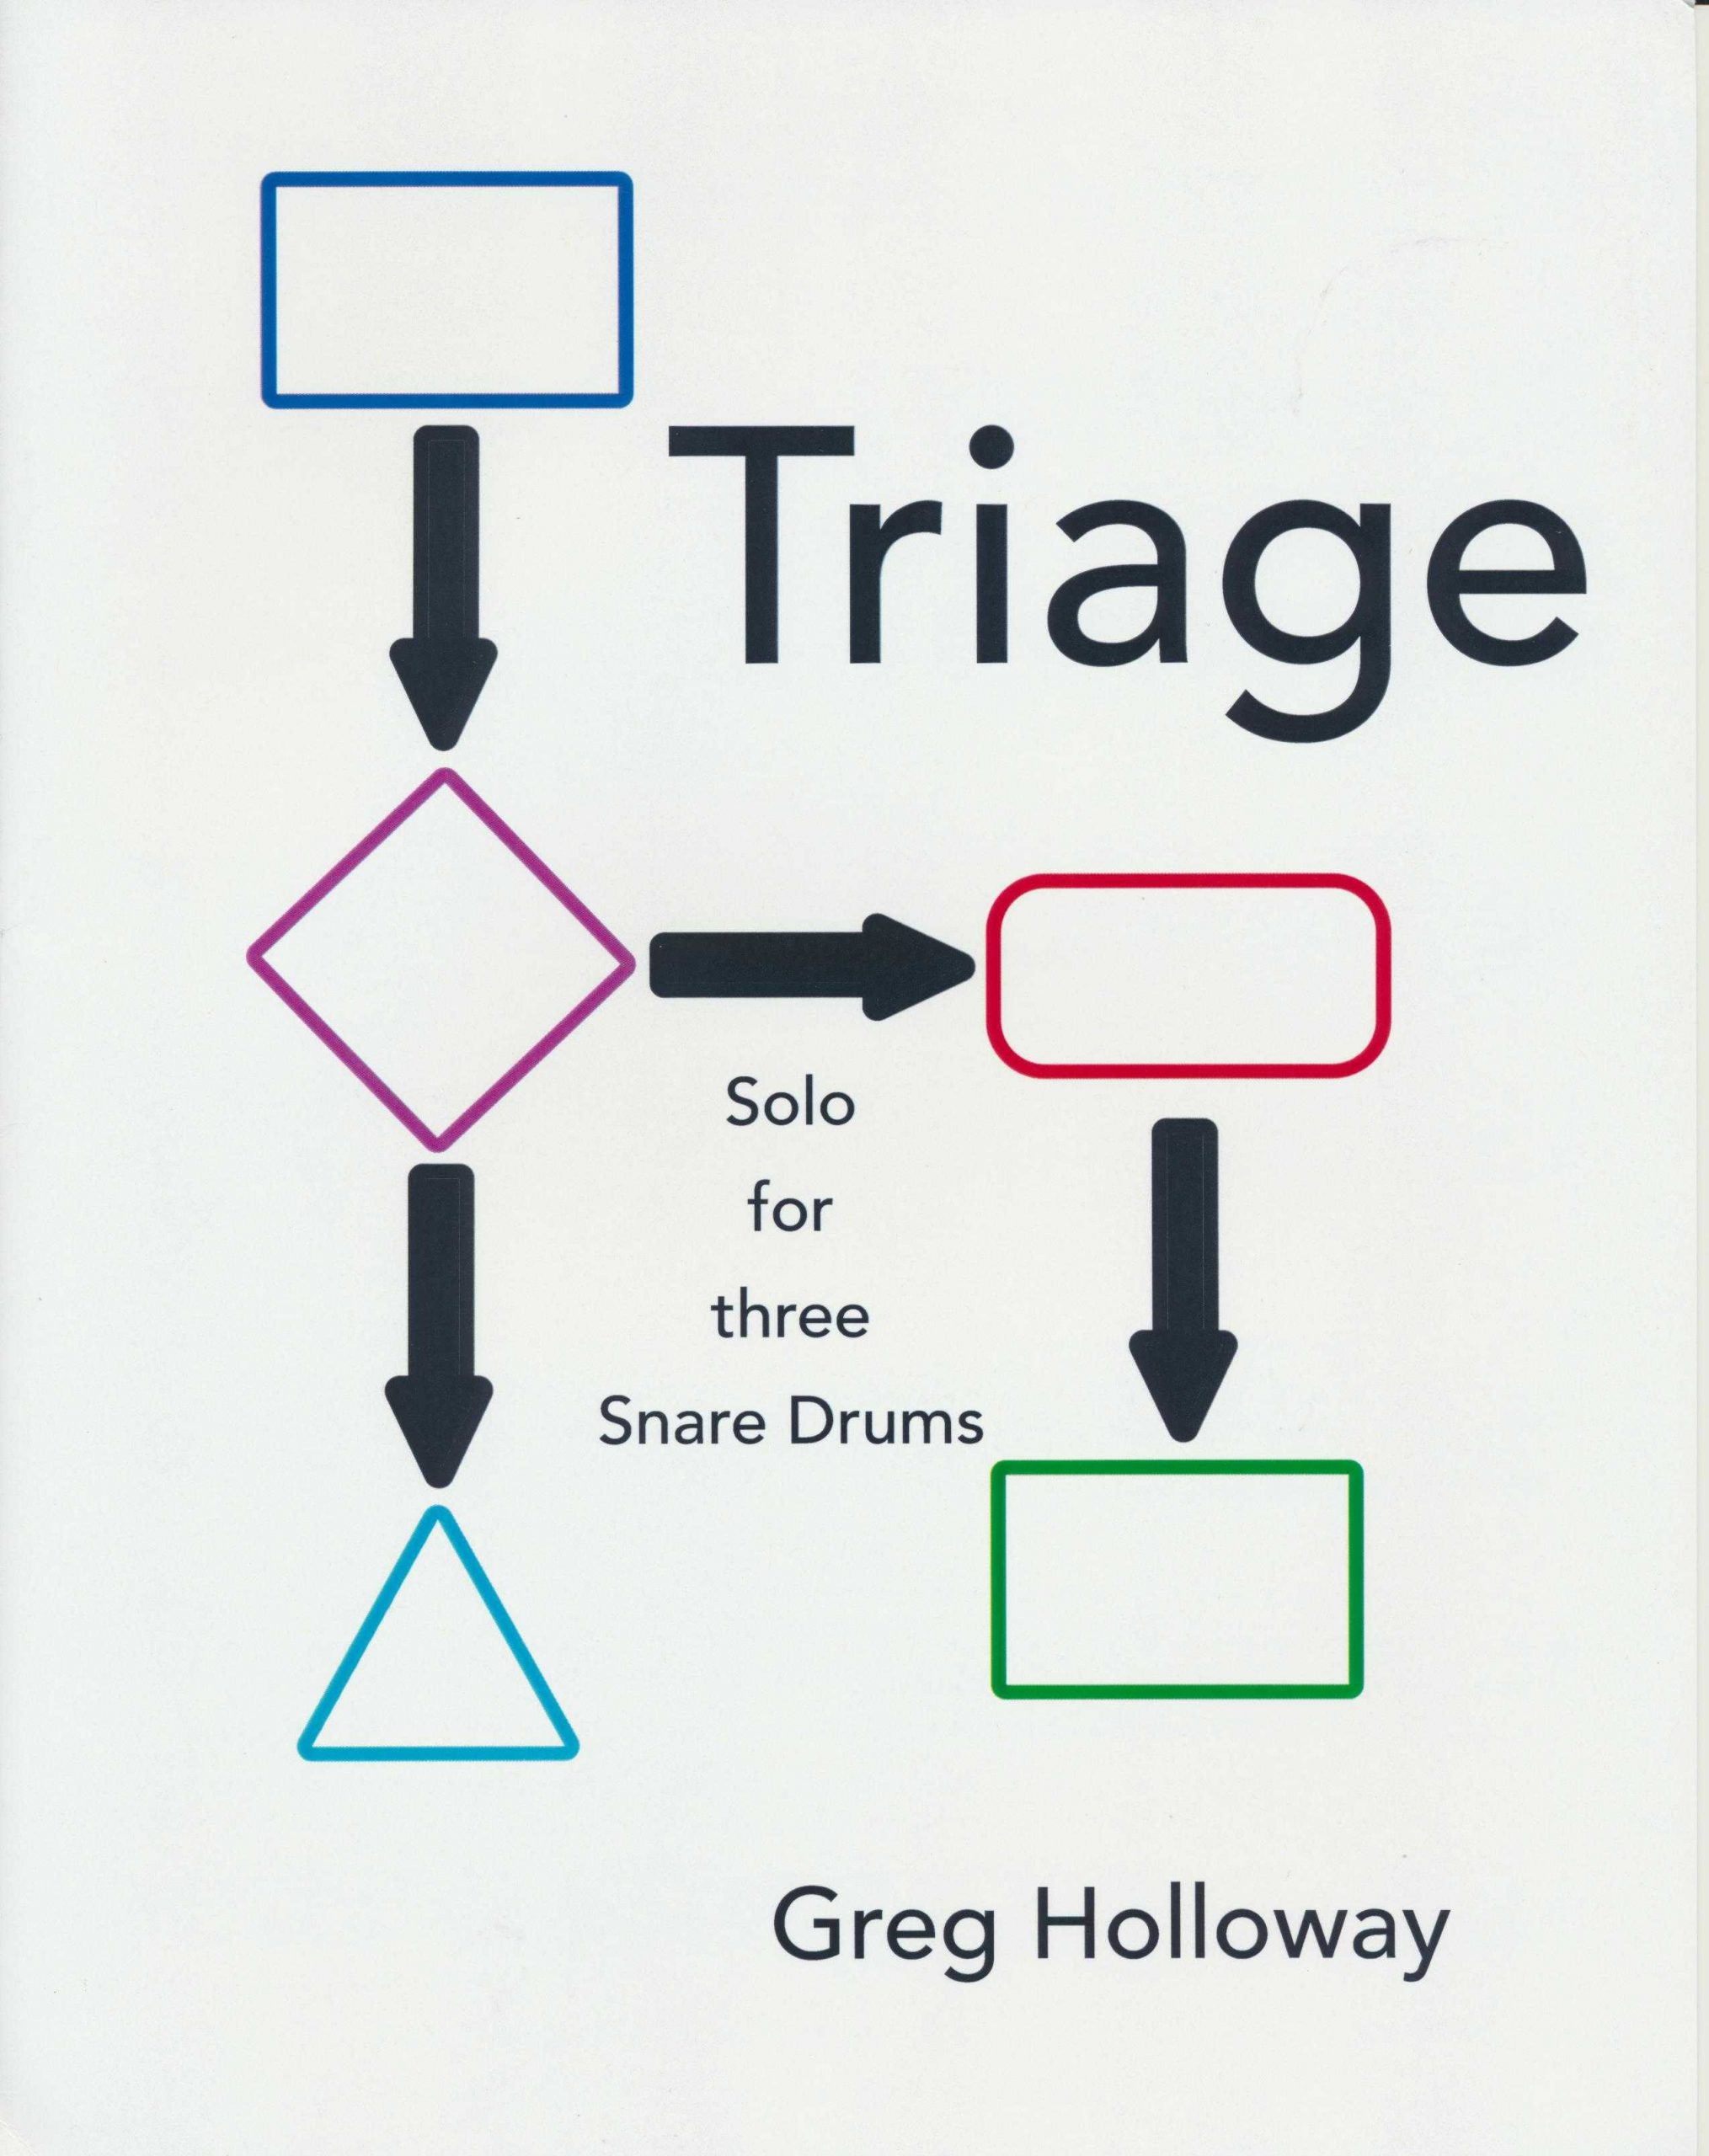 Triage by Greg Holloway